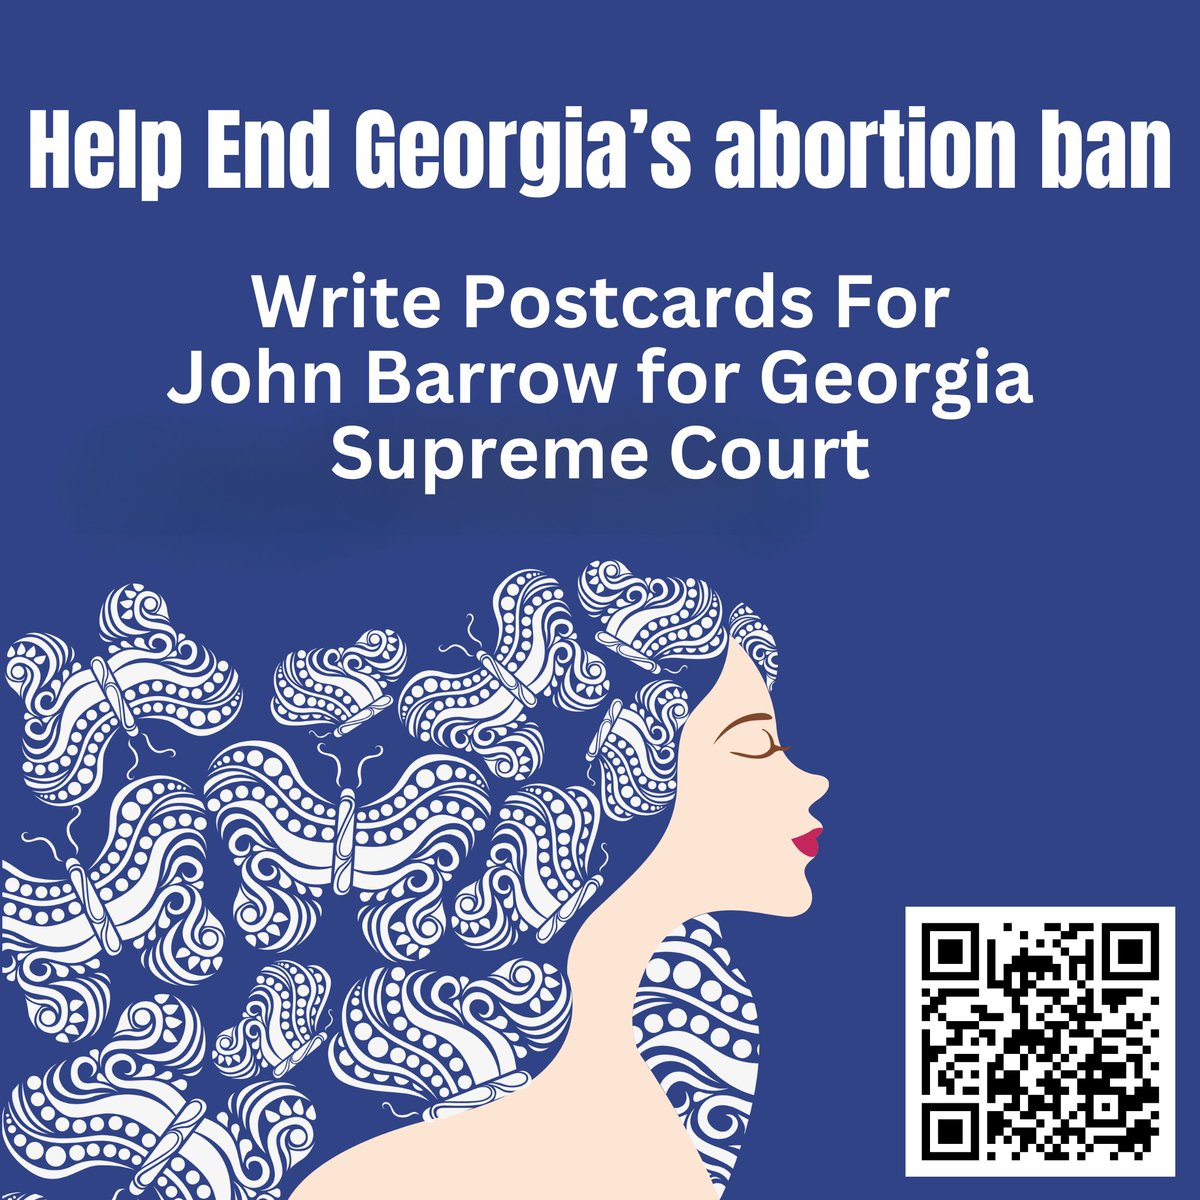 Write #PostcardsToVoters for the Democratic Primary and Nonpartisan Election Tuesday, May 21th for John Barrow for Georgia Supreme Court to restore women's right to make their own medical decisions.

Find out how at linktr.ee/postcardstovot… #AbortionIsHealthcare #RoeYourVote